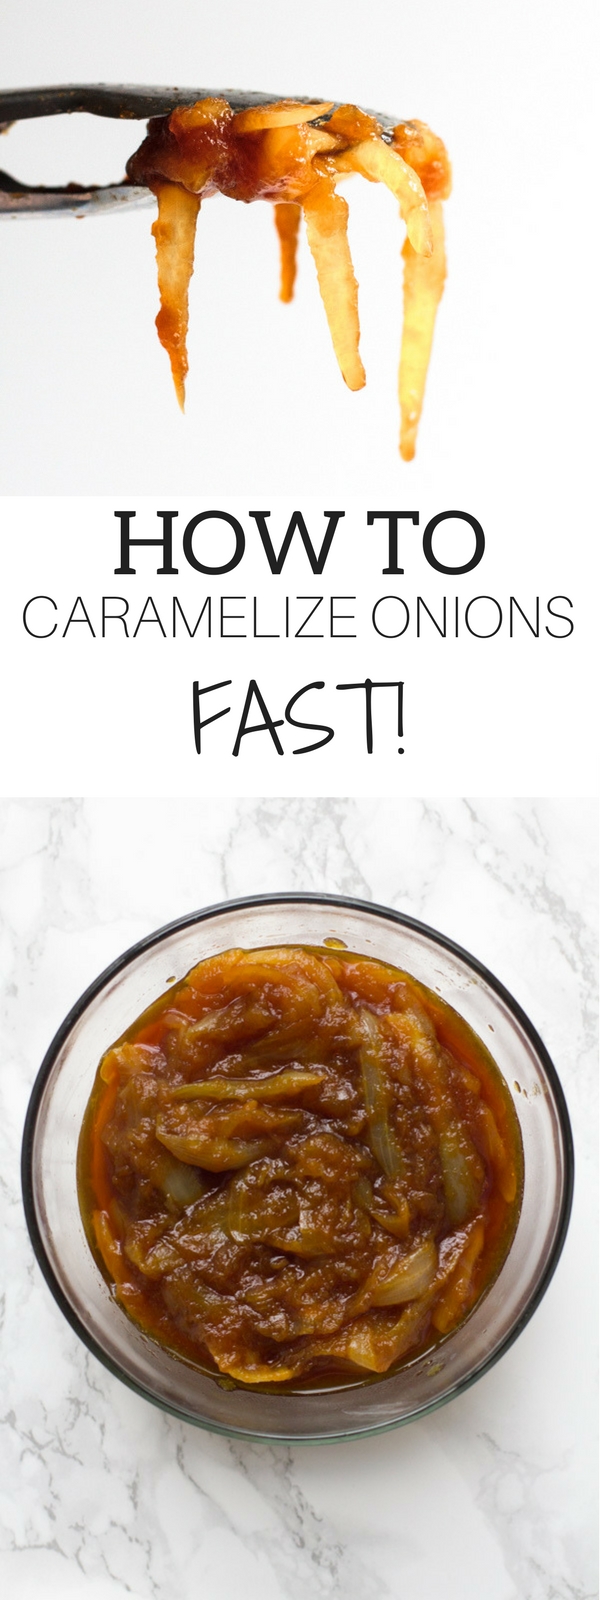 How To Caramelize Onions | How to | Caramelized Onions | Easy | Tips and Tricks | French Onion | Fast Caramelized Onions